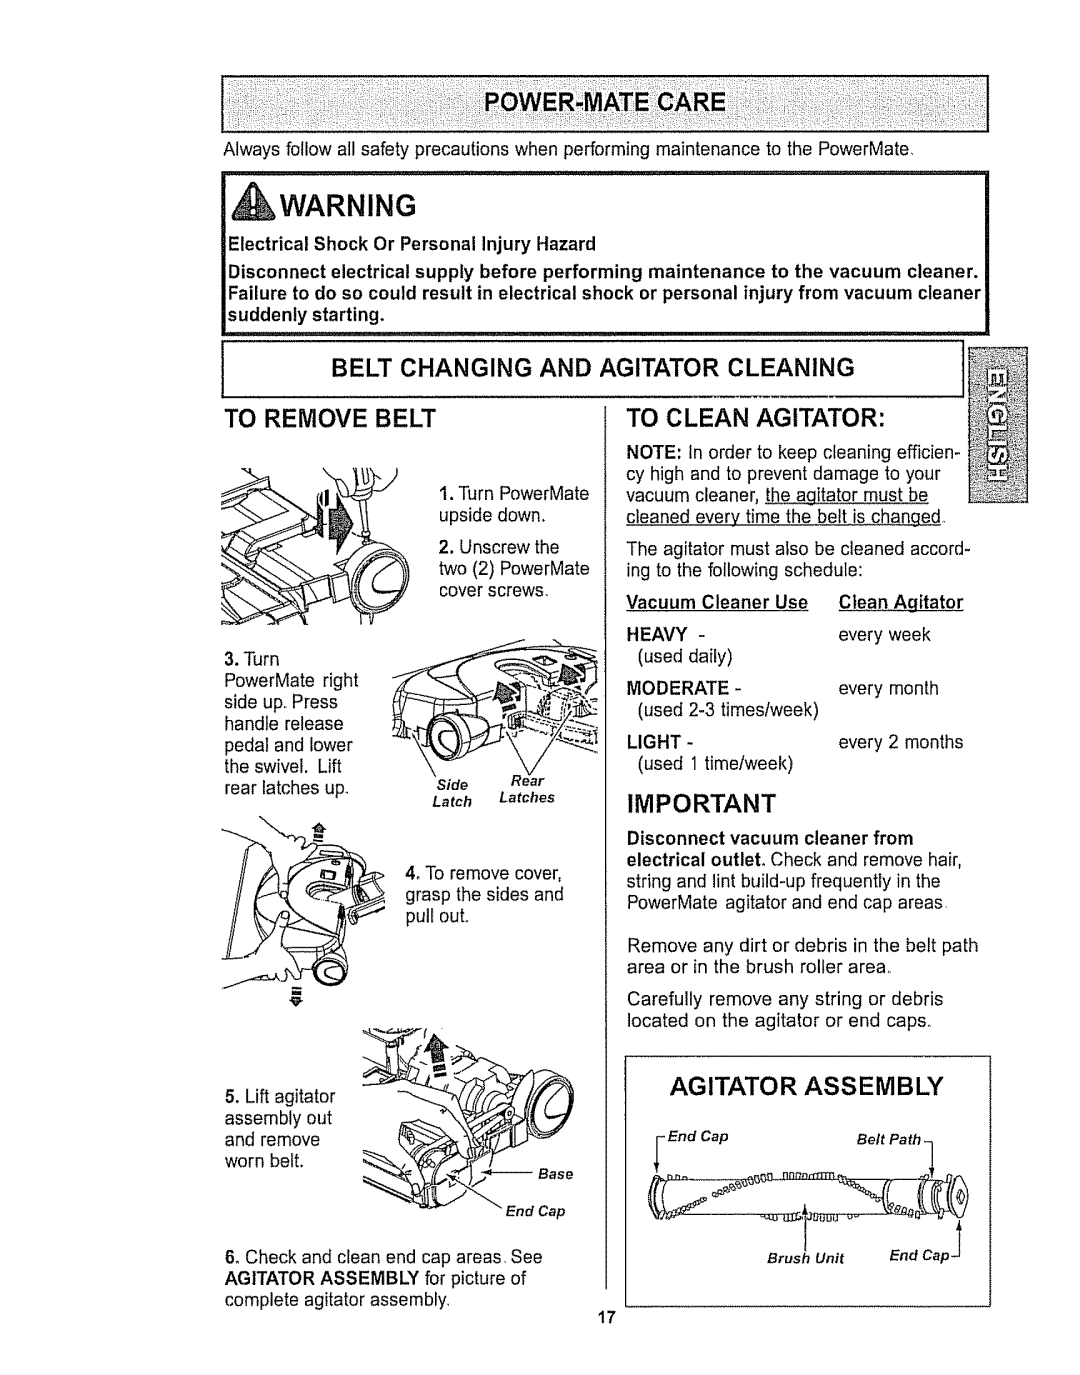 Kenmore 116.28615 owner manual To Remove Belt, To Clean Agitator, Belt Changing And Agitator Cleaning, worn belt 